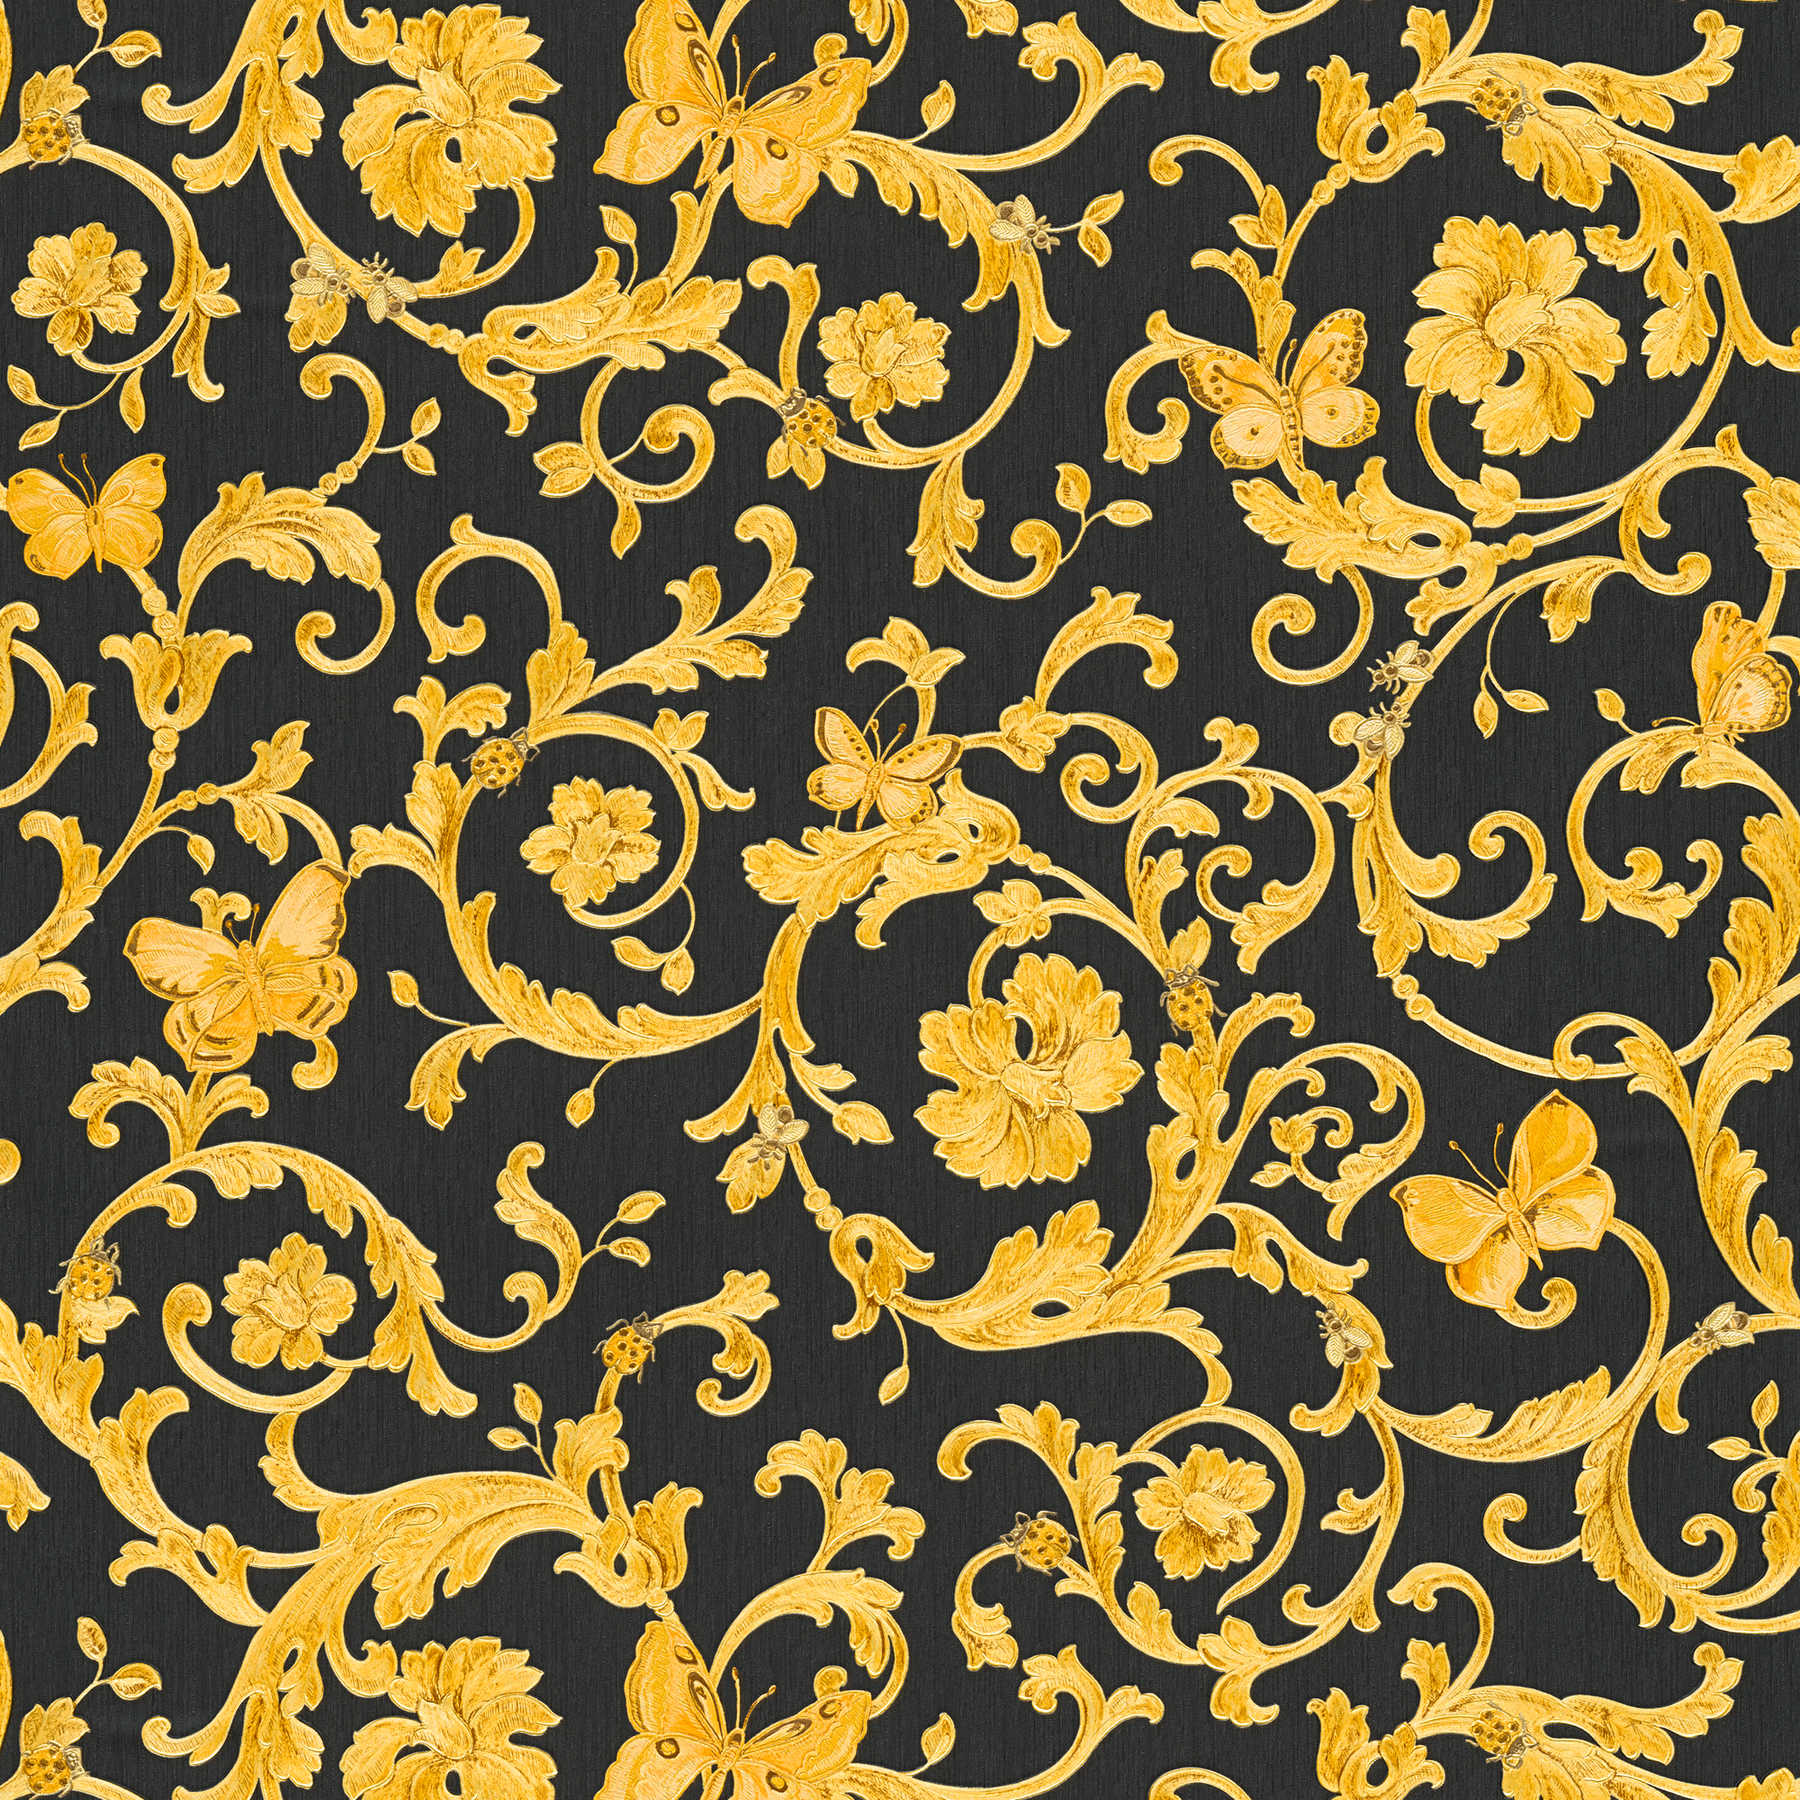 Black VERSACE wallpaper with gold ornaments & butterfly
